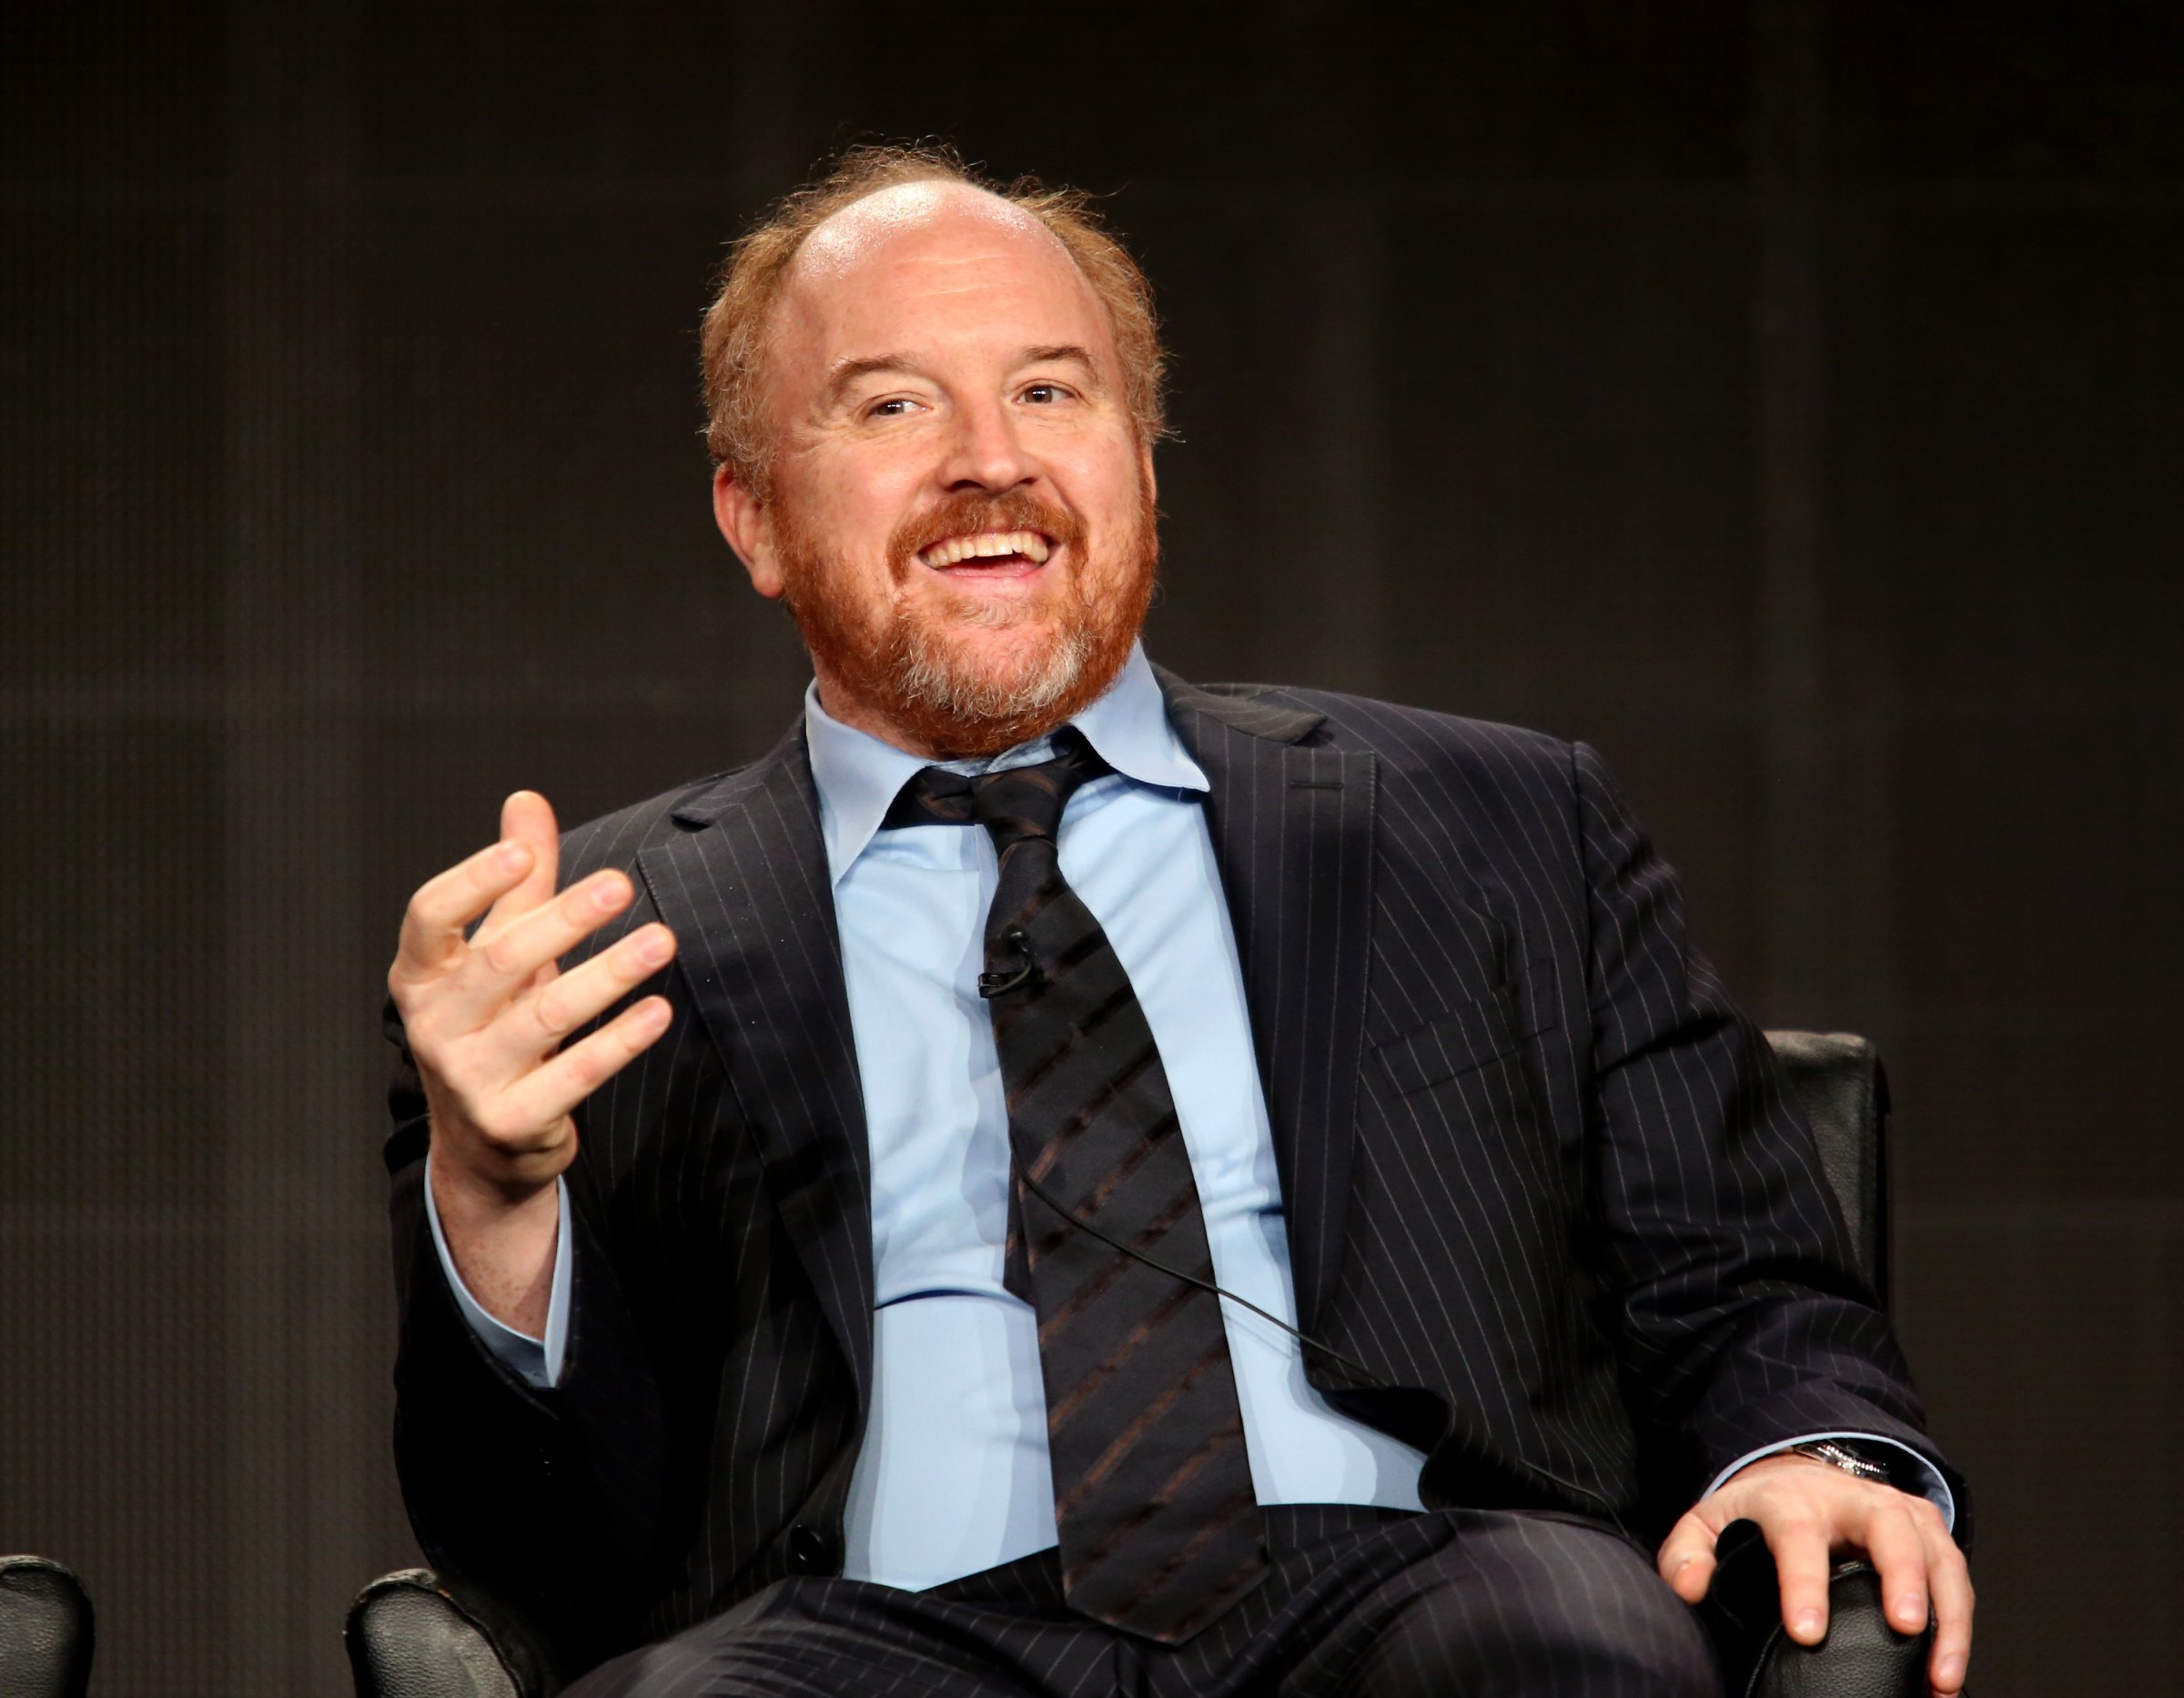 Louis C.K. at the 'Louie' panel discussion during the Television Critics Association press tour in Pasadena, Calif. on Jan. 18, 2015.